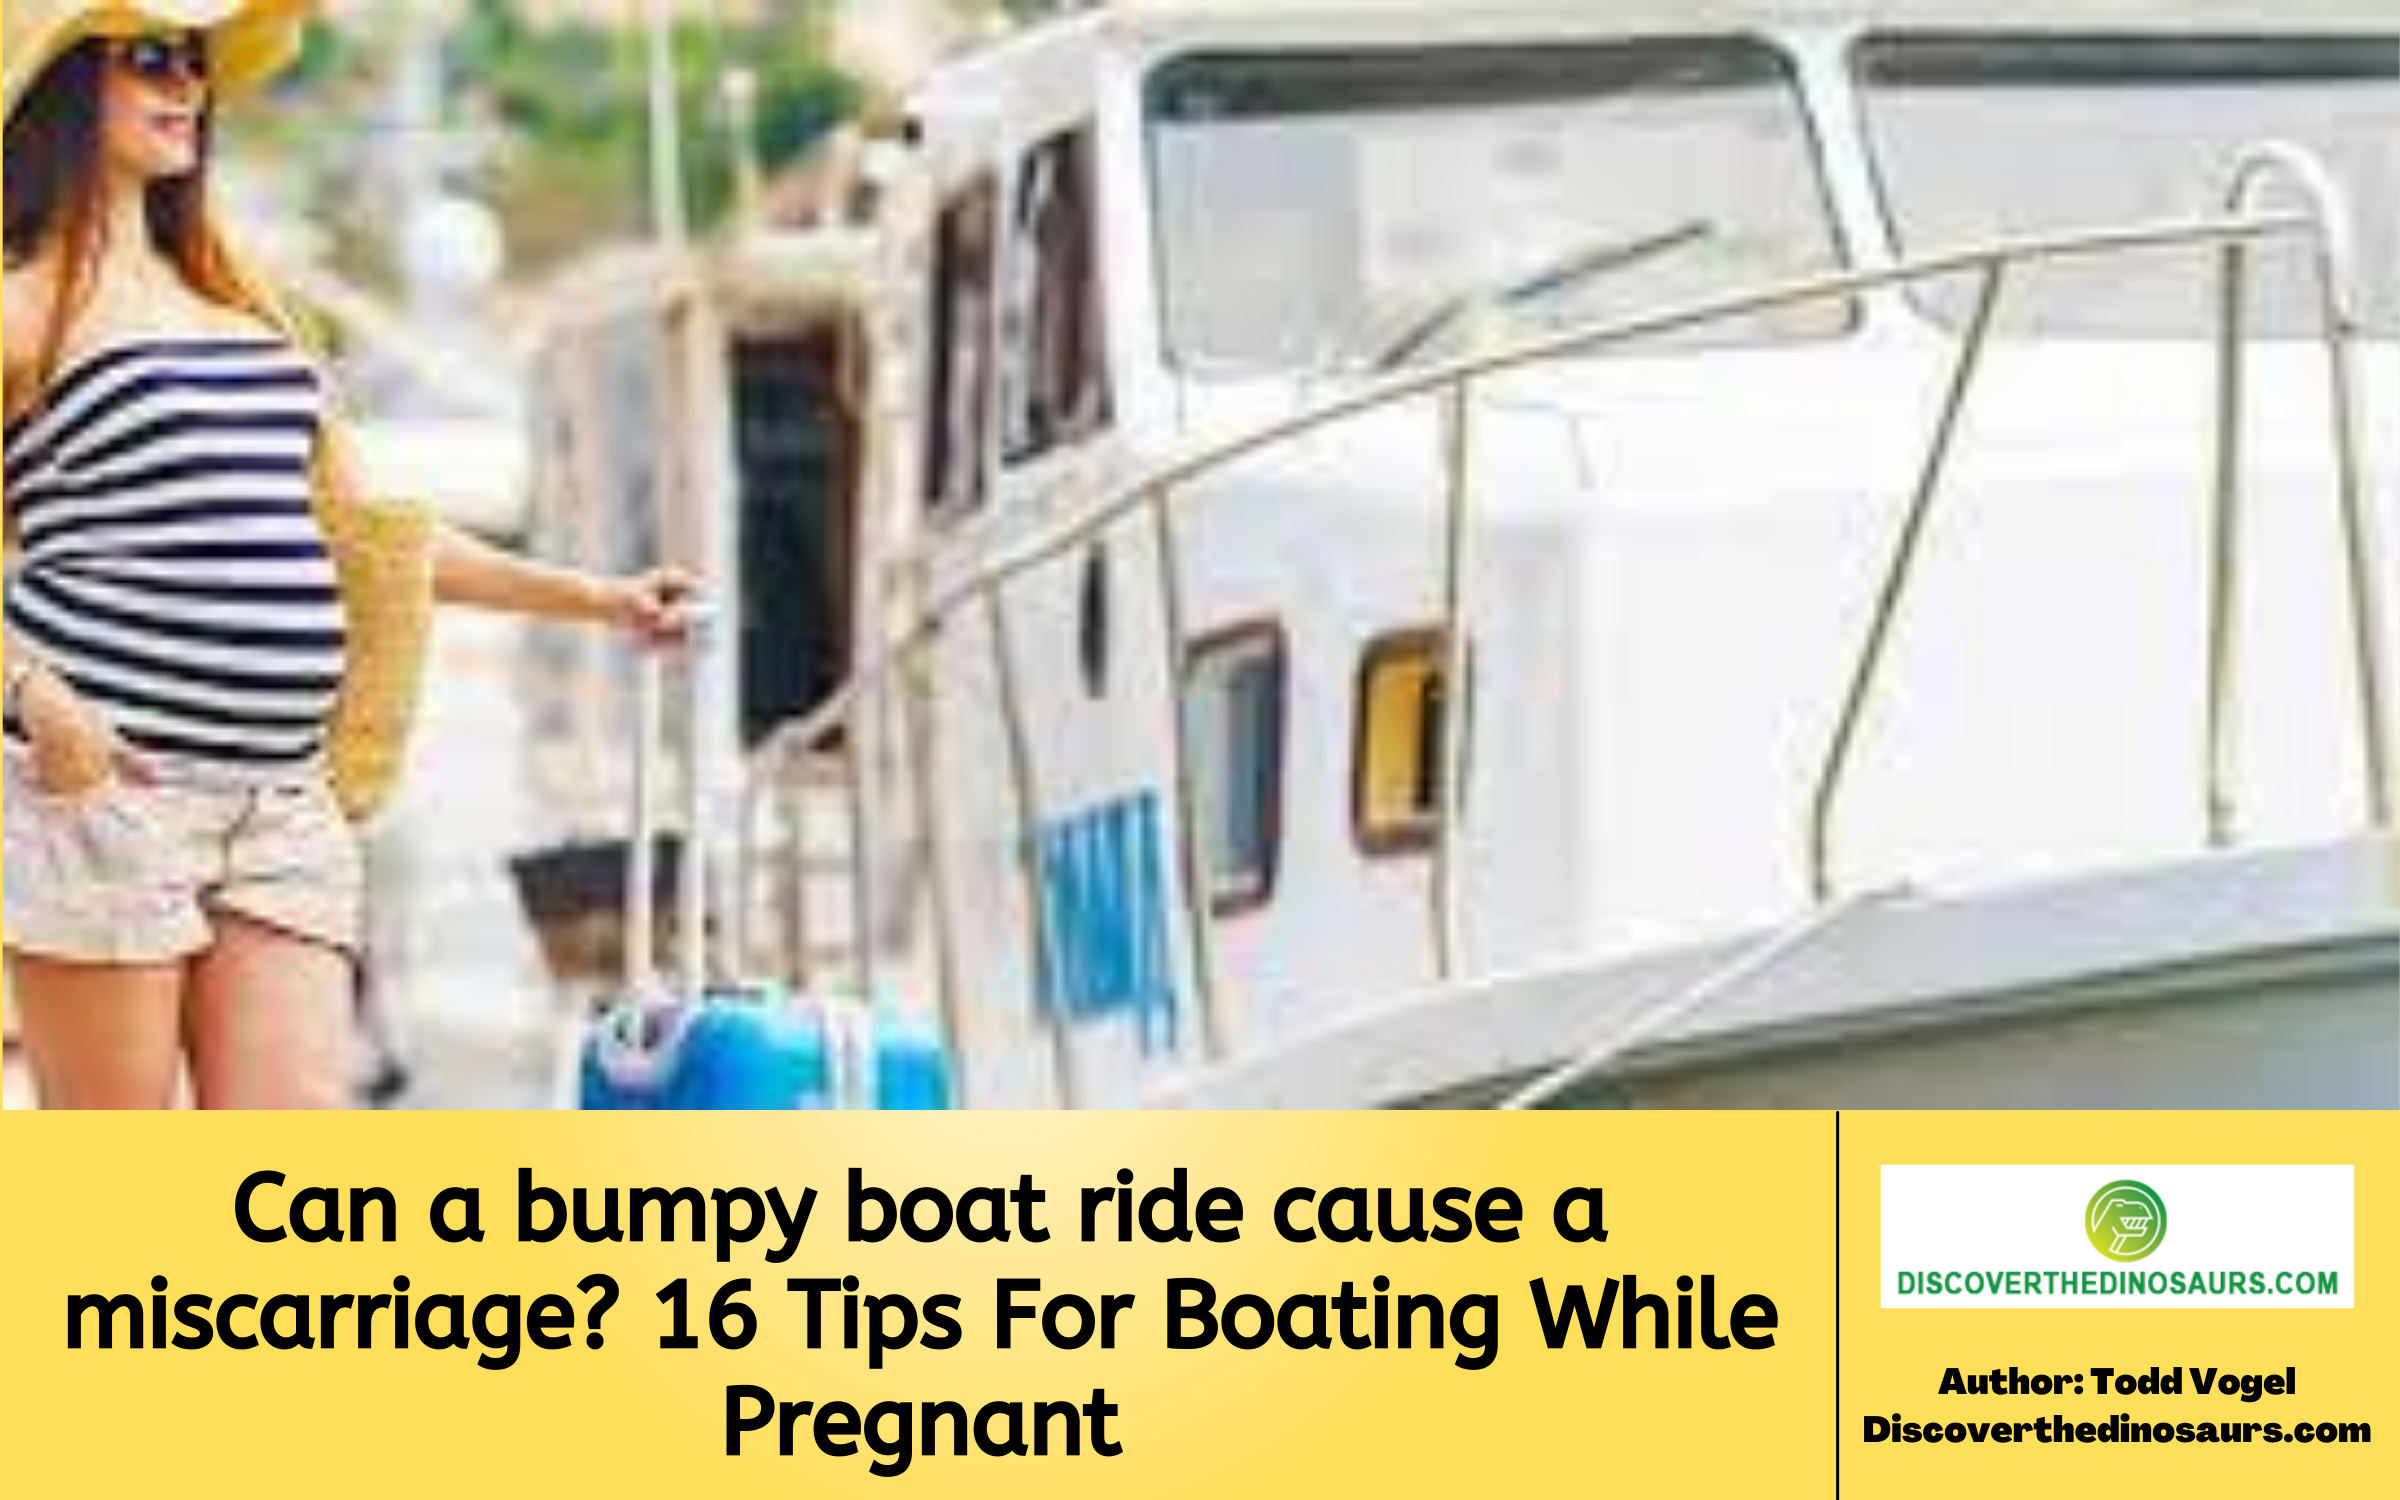 Can a bumpy boat ride cause a miscarriage? 16 Tips For Boating While Pregnant